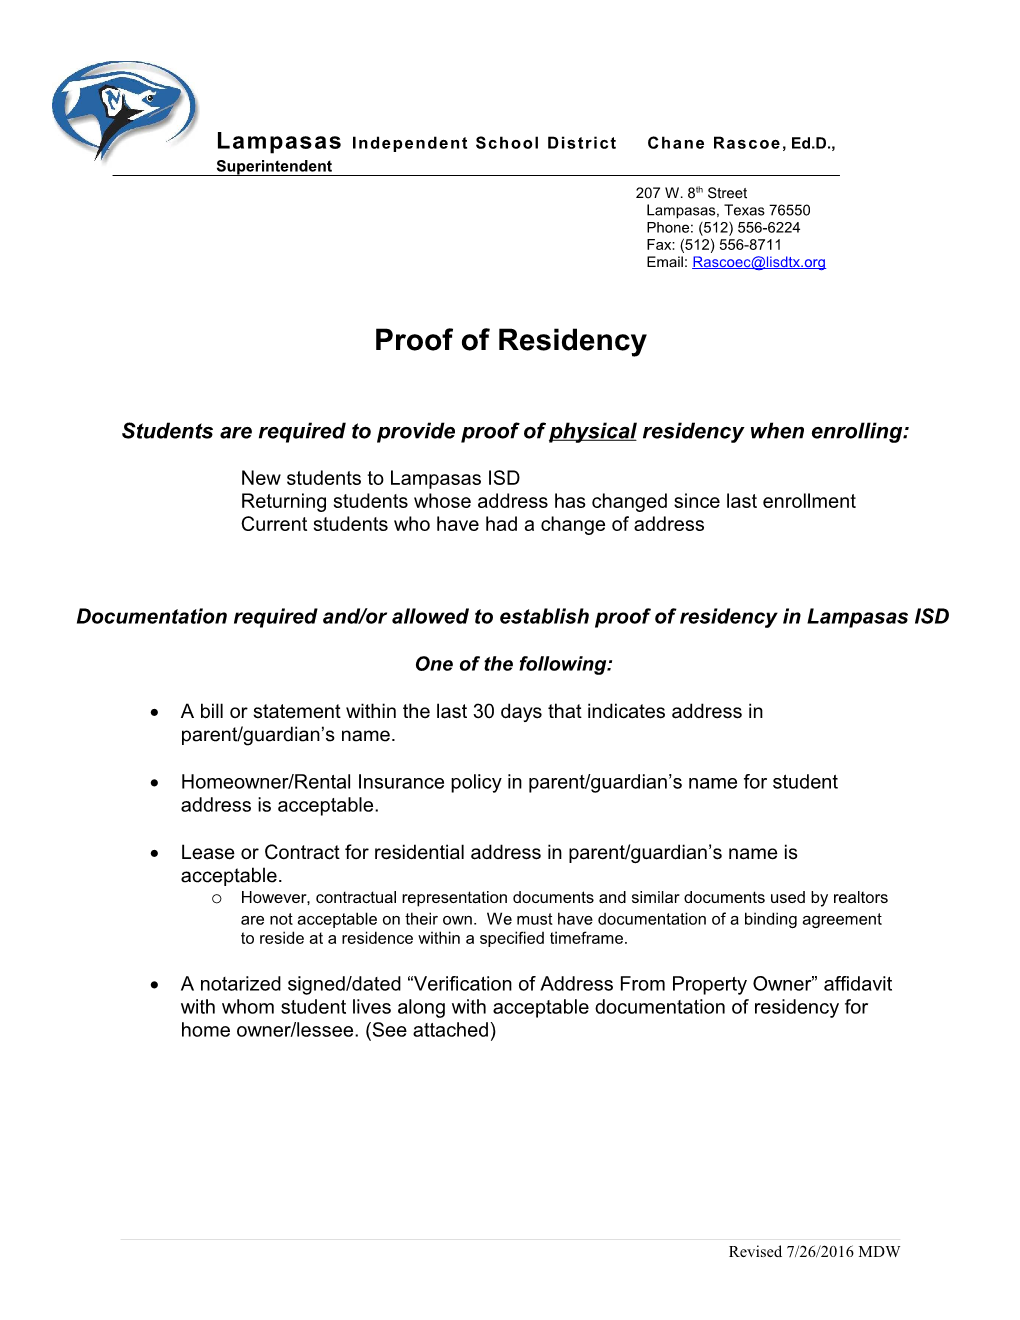 Students Are Required to Provide Proof of Physicalresidency When Enrolling